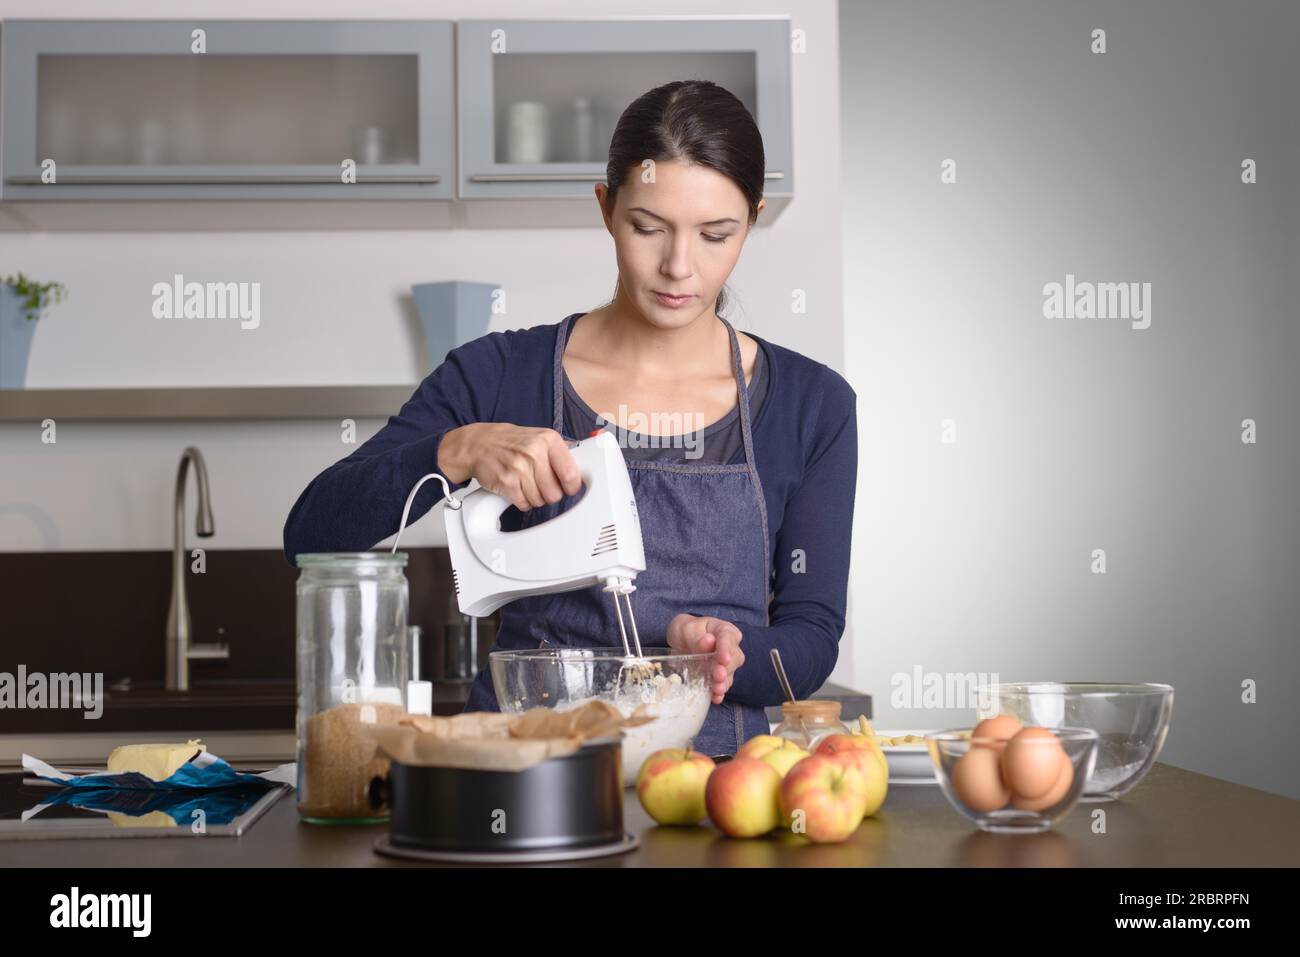 Young woman baking an apple pie in the kitchen standing at the counter in her apron using a handheld mixer to whisk the fresh ingredients in a glass Stock Photo